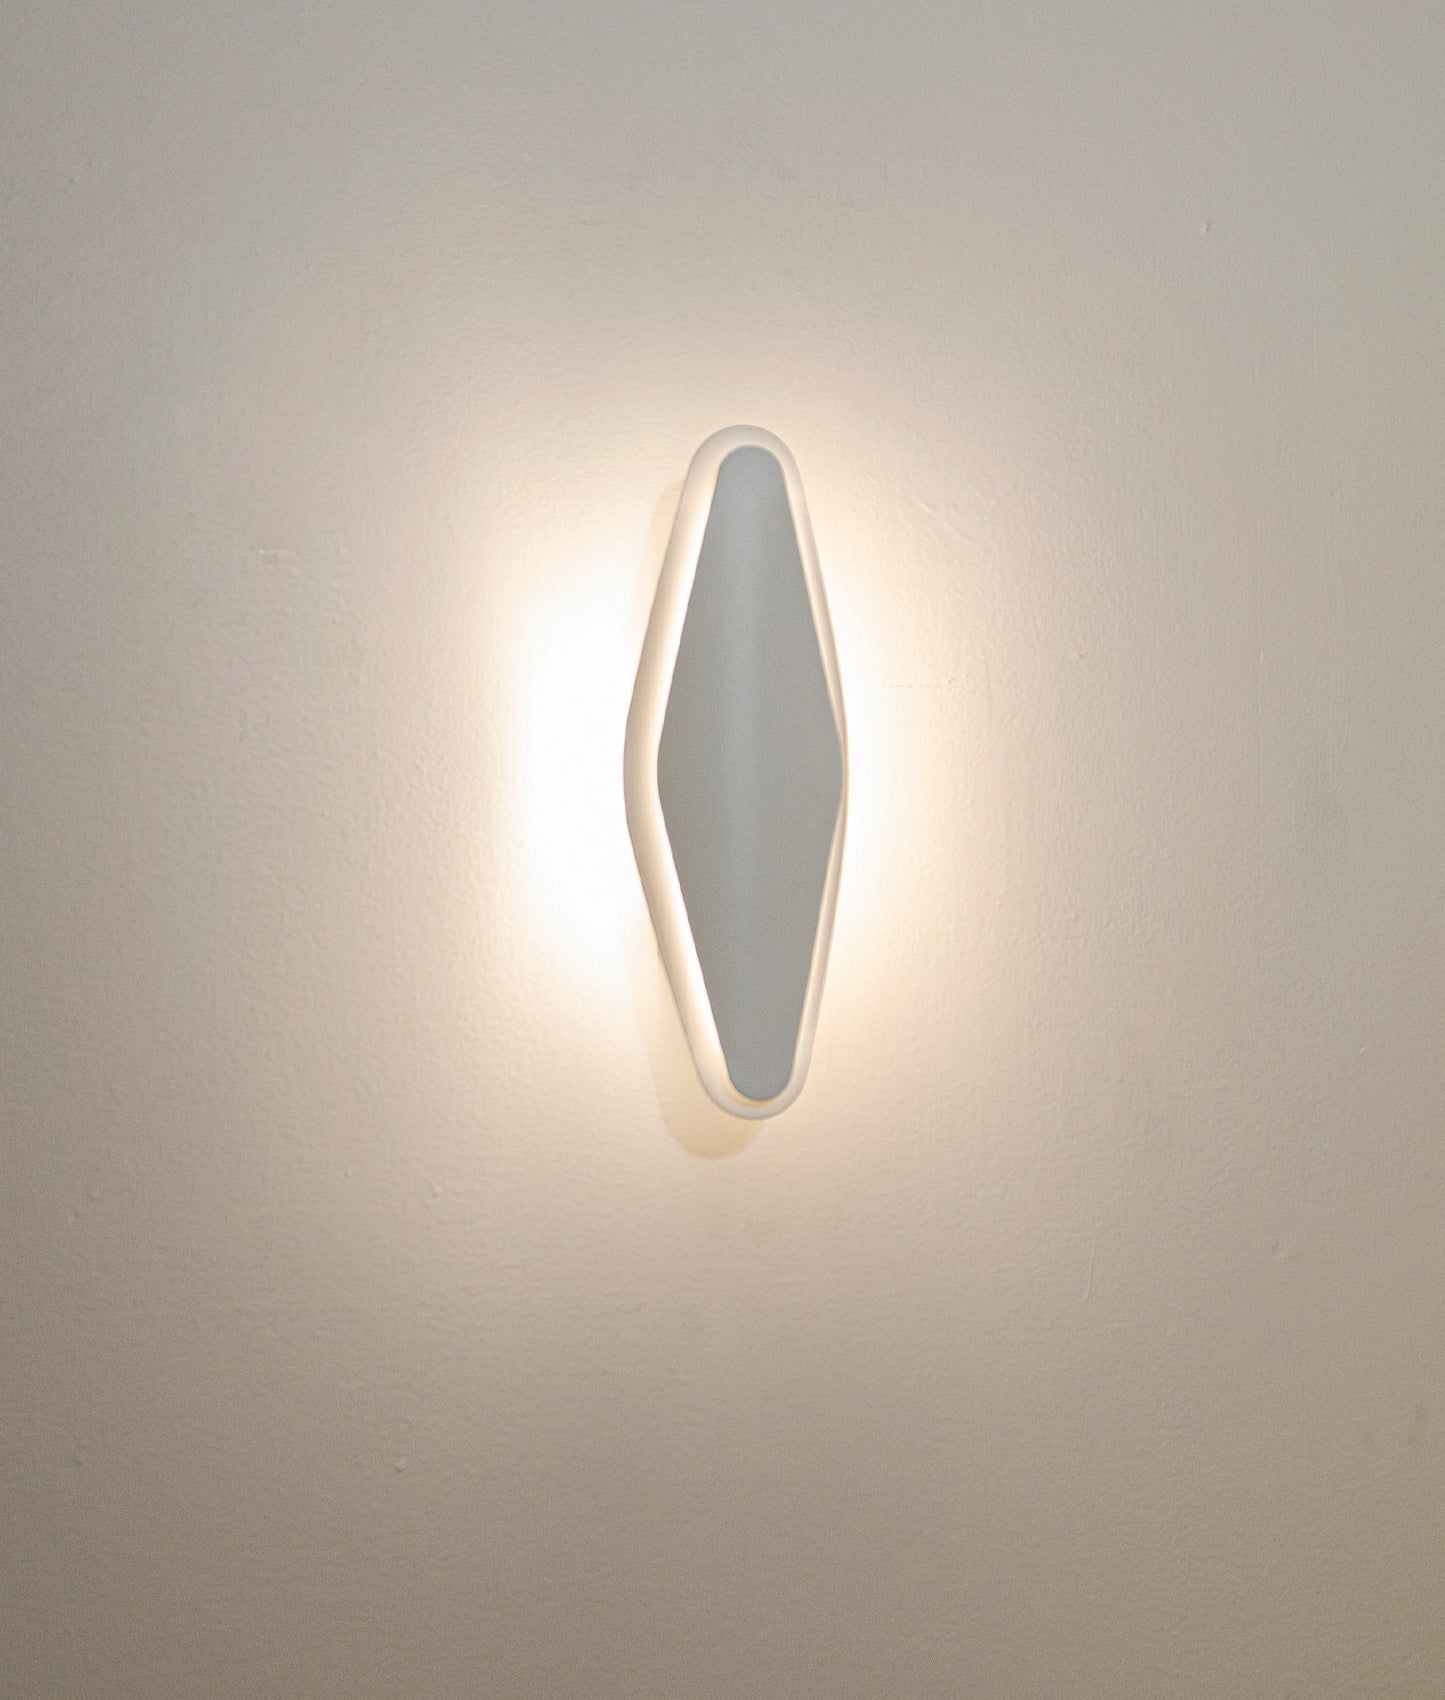 SANTIAGO: City Series LED Tri-CCT Interior Oval Dimmable Wall Light